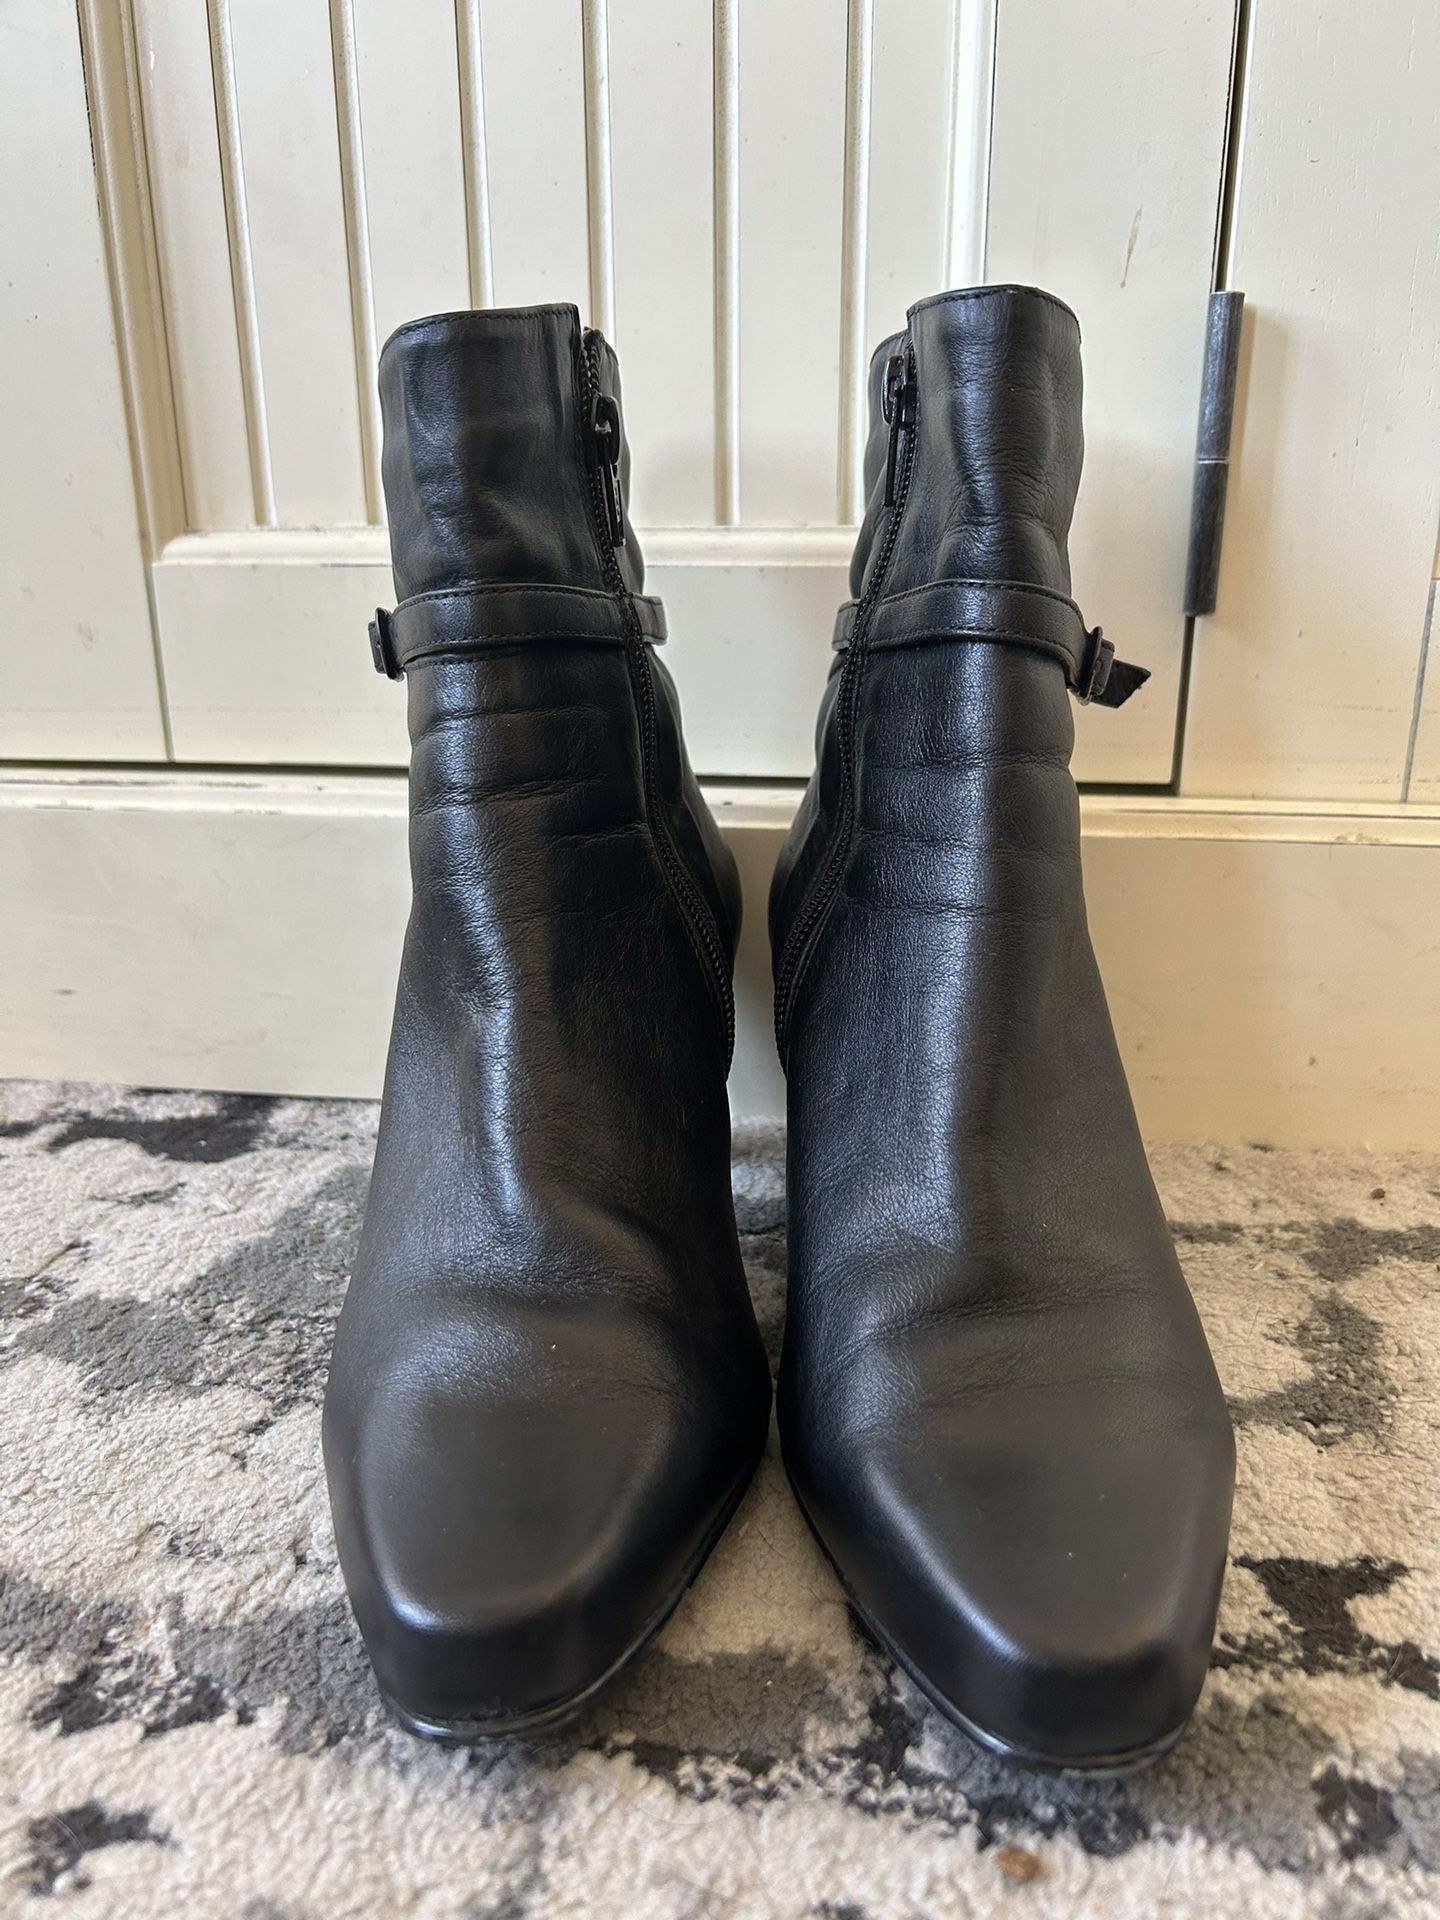 Black Leather Ankle Boots Size 5.5 - Two inch Heel 